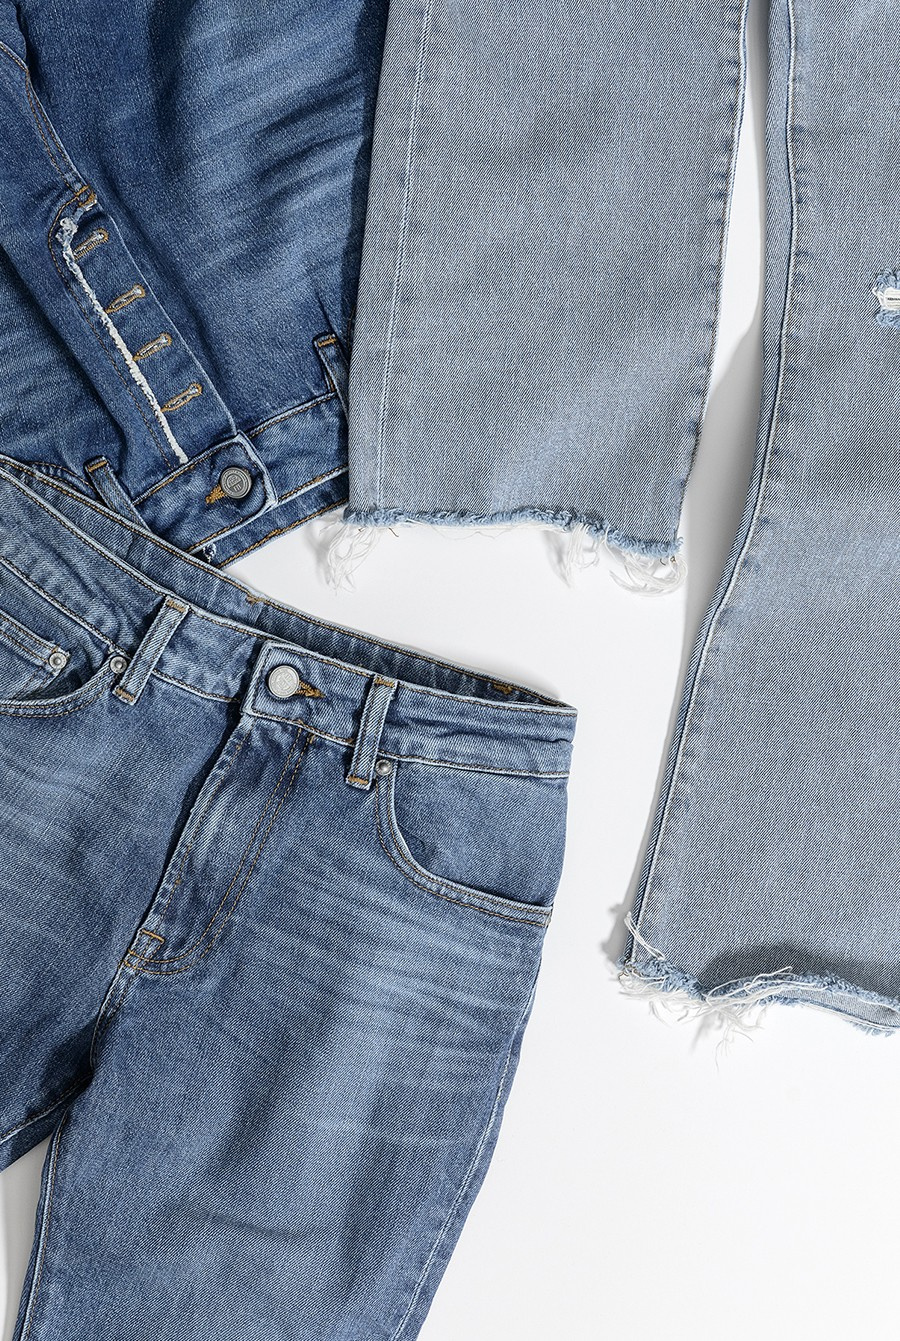 How to Turn Old Jeans into an Awesome Denim Bag - Zero-Waste Chef